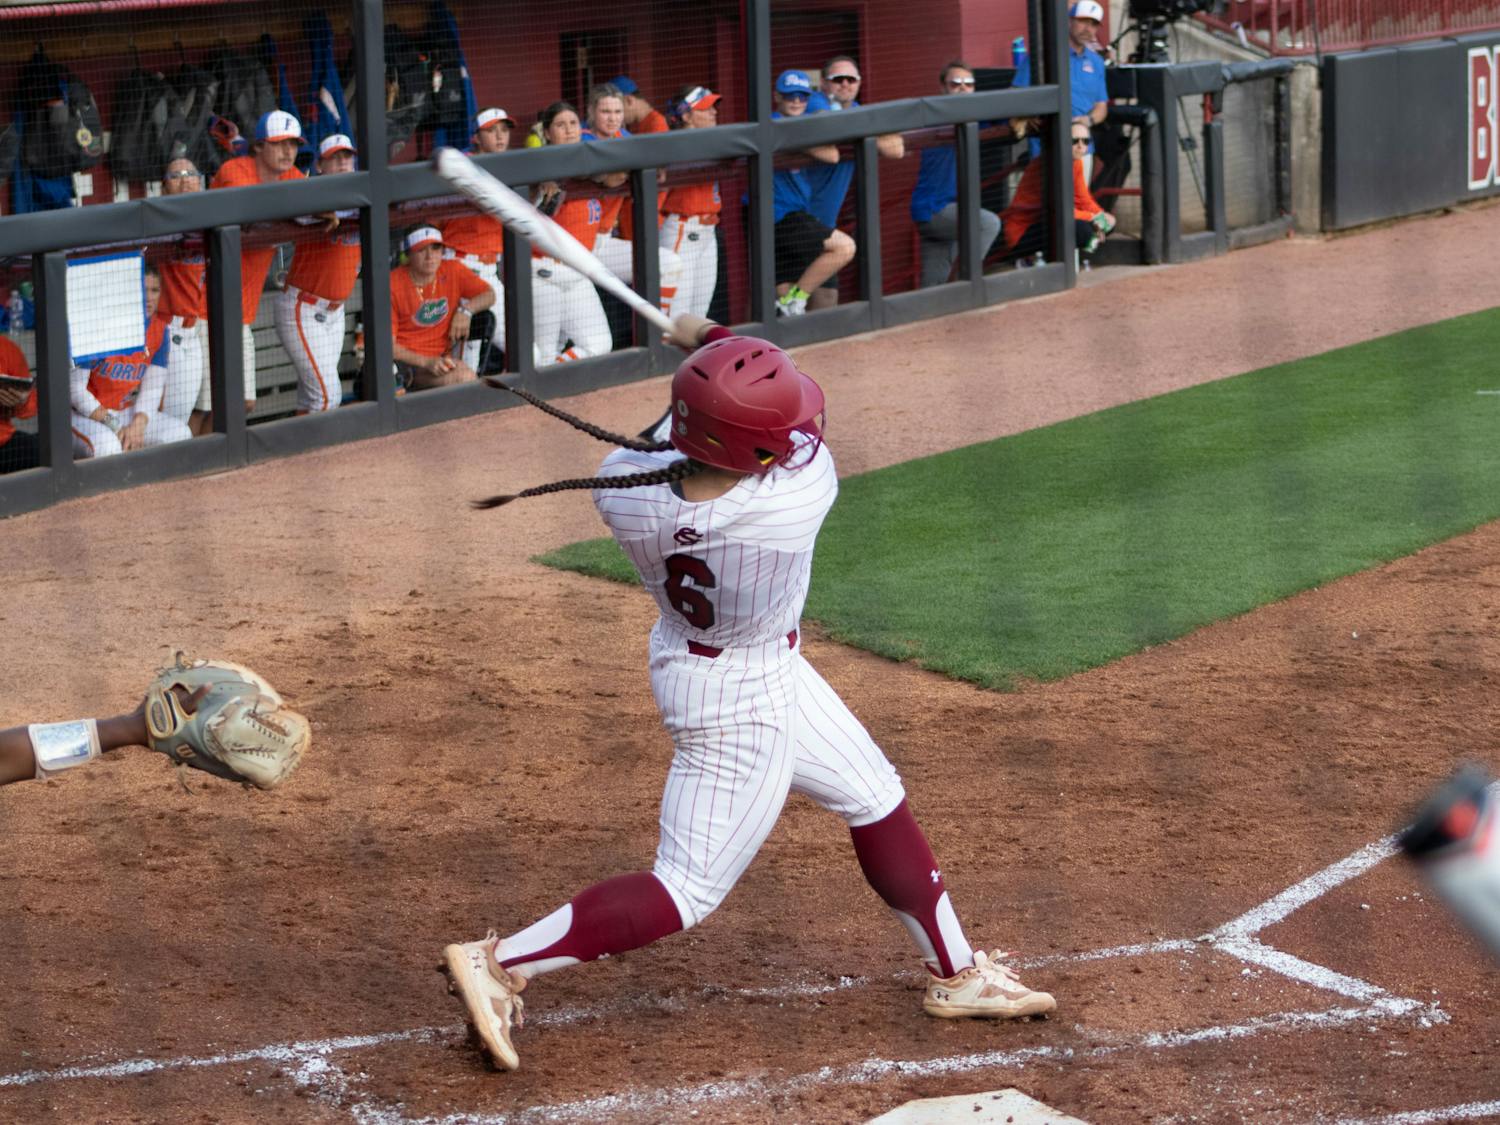 Fifth-year infielder Jordan Fabian swings during an at-bat against Florida on March 31, 2023, at Beckham Field. The Gamecocks beat the Gators 13-10 in the first game of the weekend.